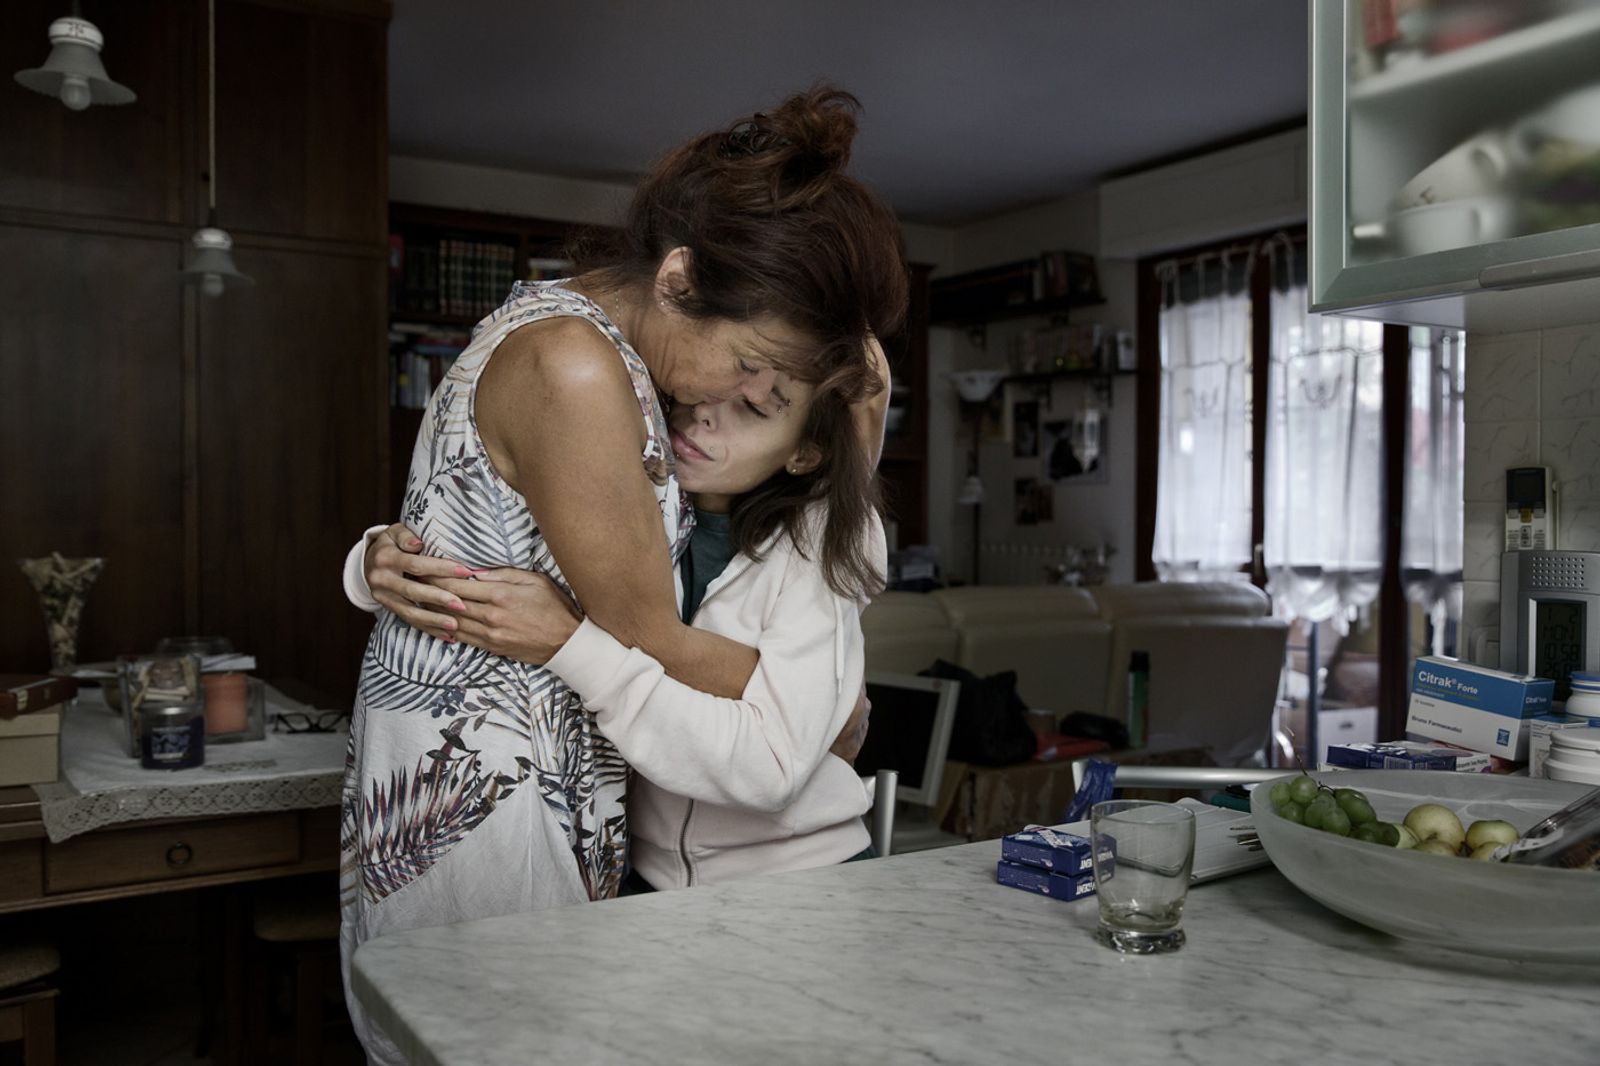 © Leonardo Chiarabini - Vanessa and her mother enbrace in their's kitchen. Florence, Italy.